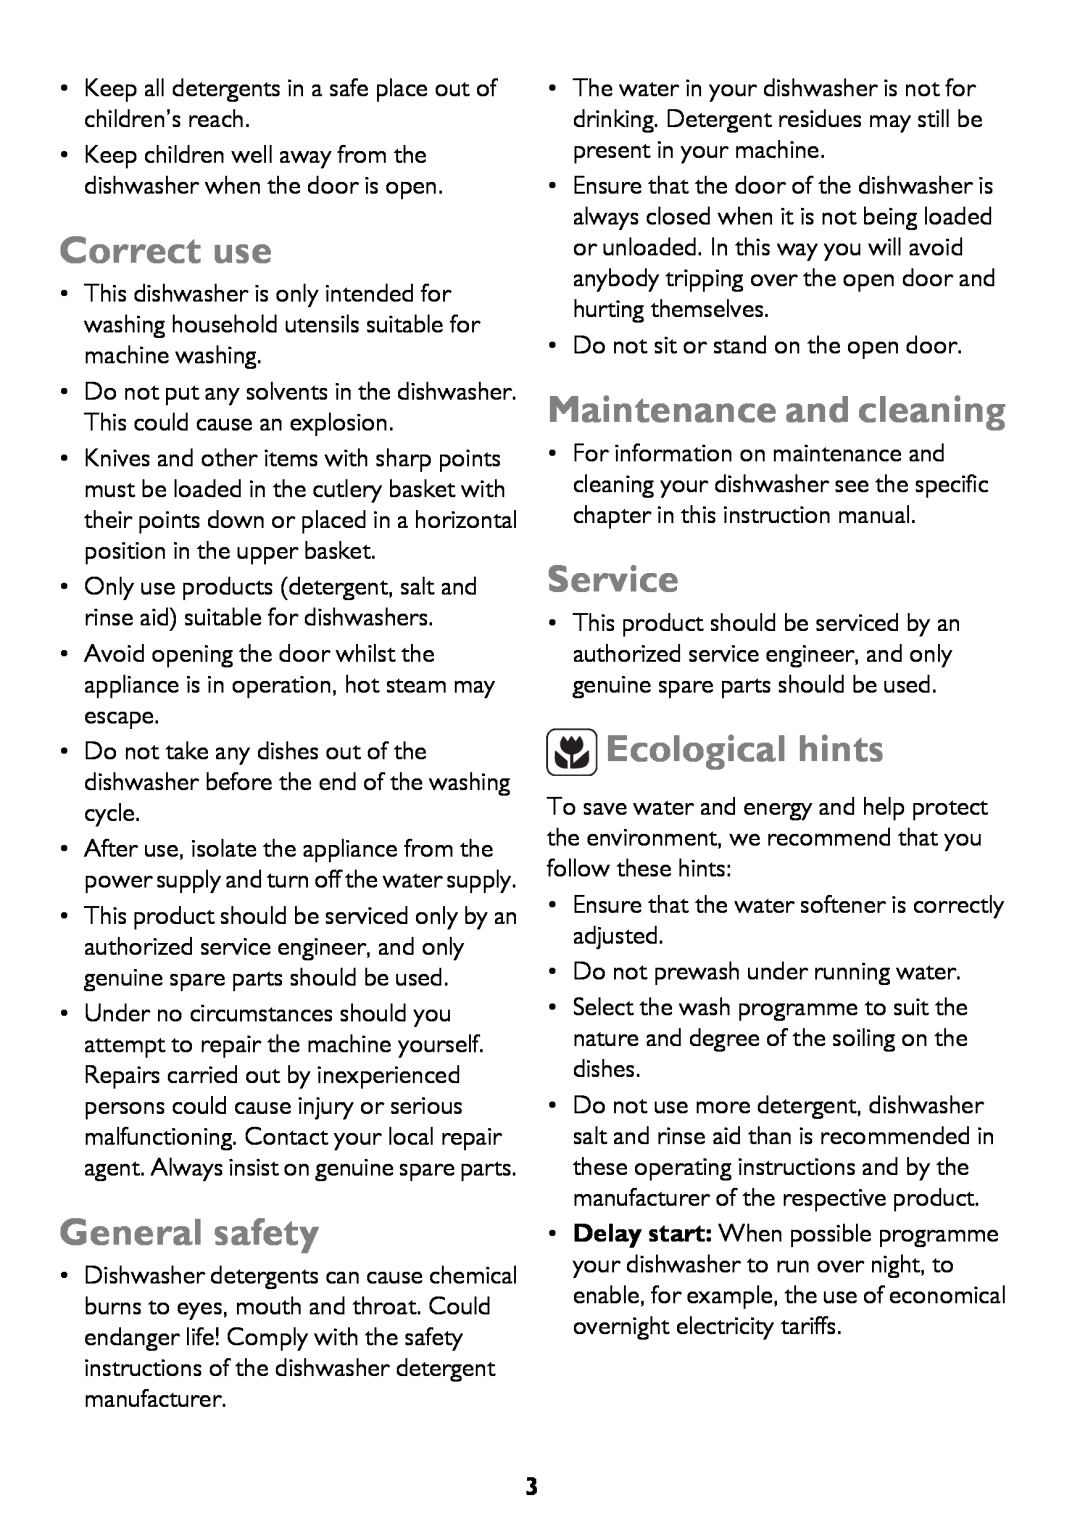 John Lewis JLDWW 906 instruction manual Correct use, General safety, Maintenance and cleaning, Service, Ecological hints 